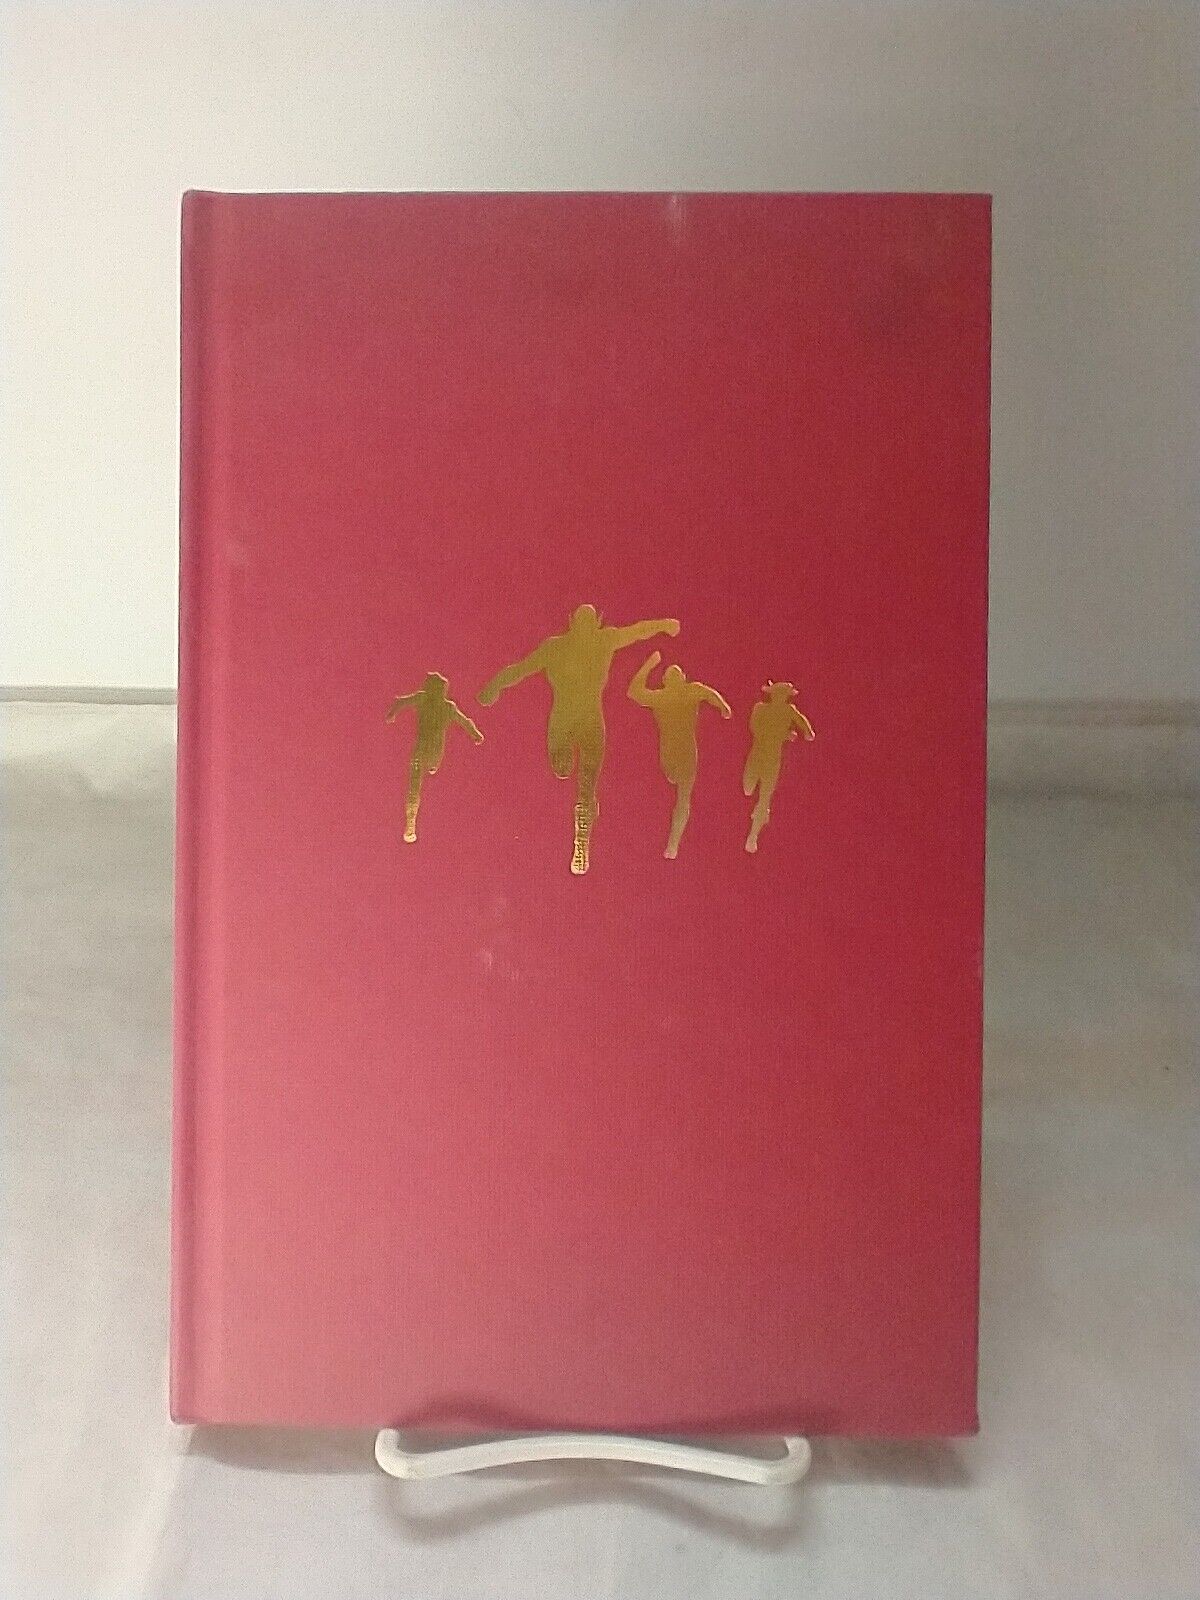 The Flash: The Rebirth by Geoff Johns Hardcover Used No Dust Jacket DC Comics